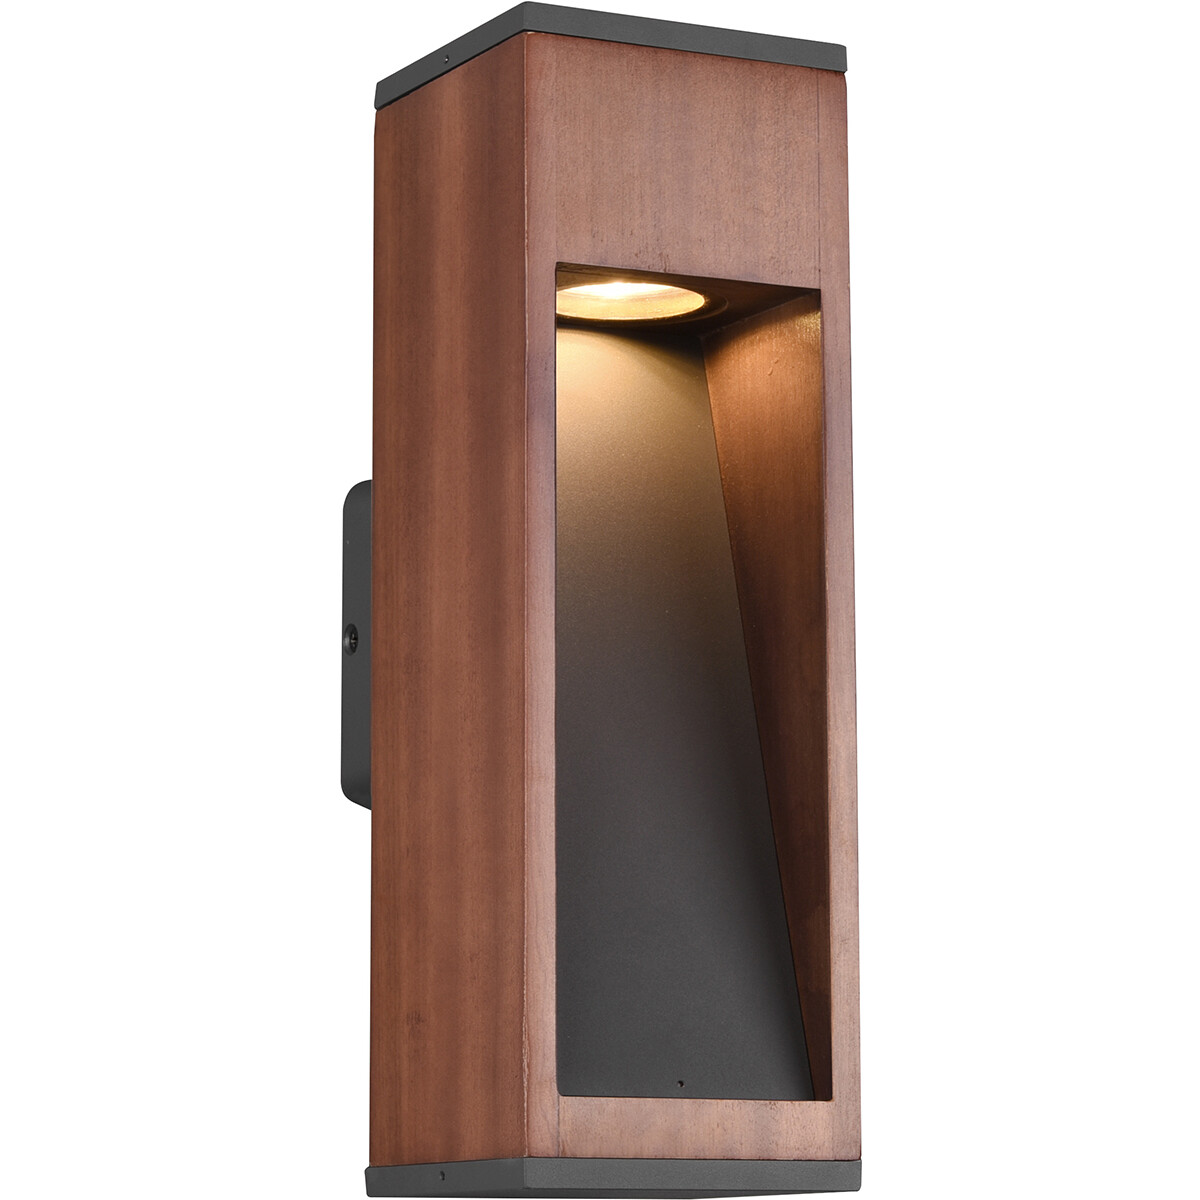 LED Tuinverlichting Wandlamp Buitenlamp Trion Enico GU10 Fitting Rechthoek Hout Natuur Hout